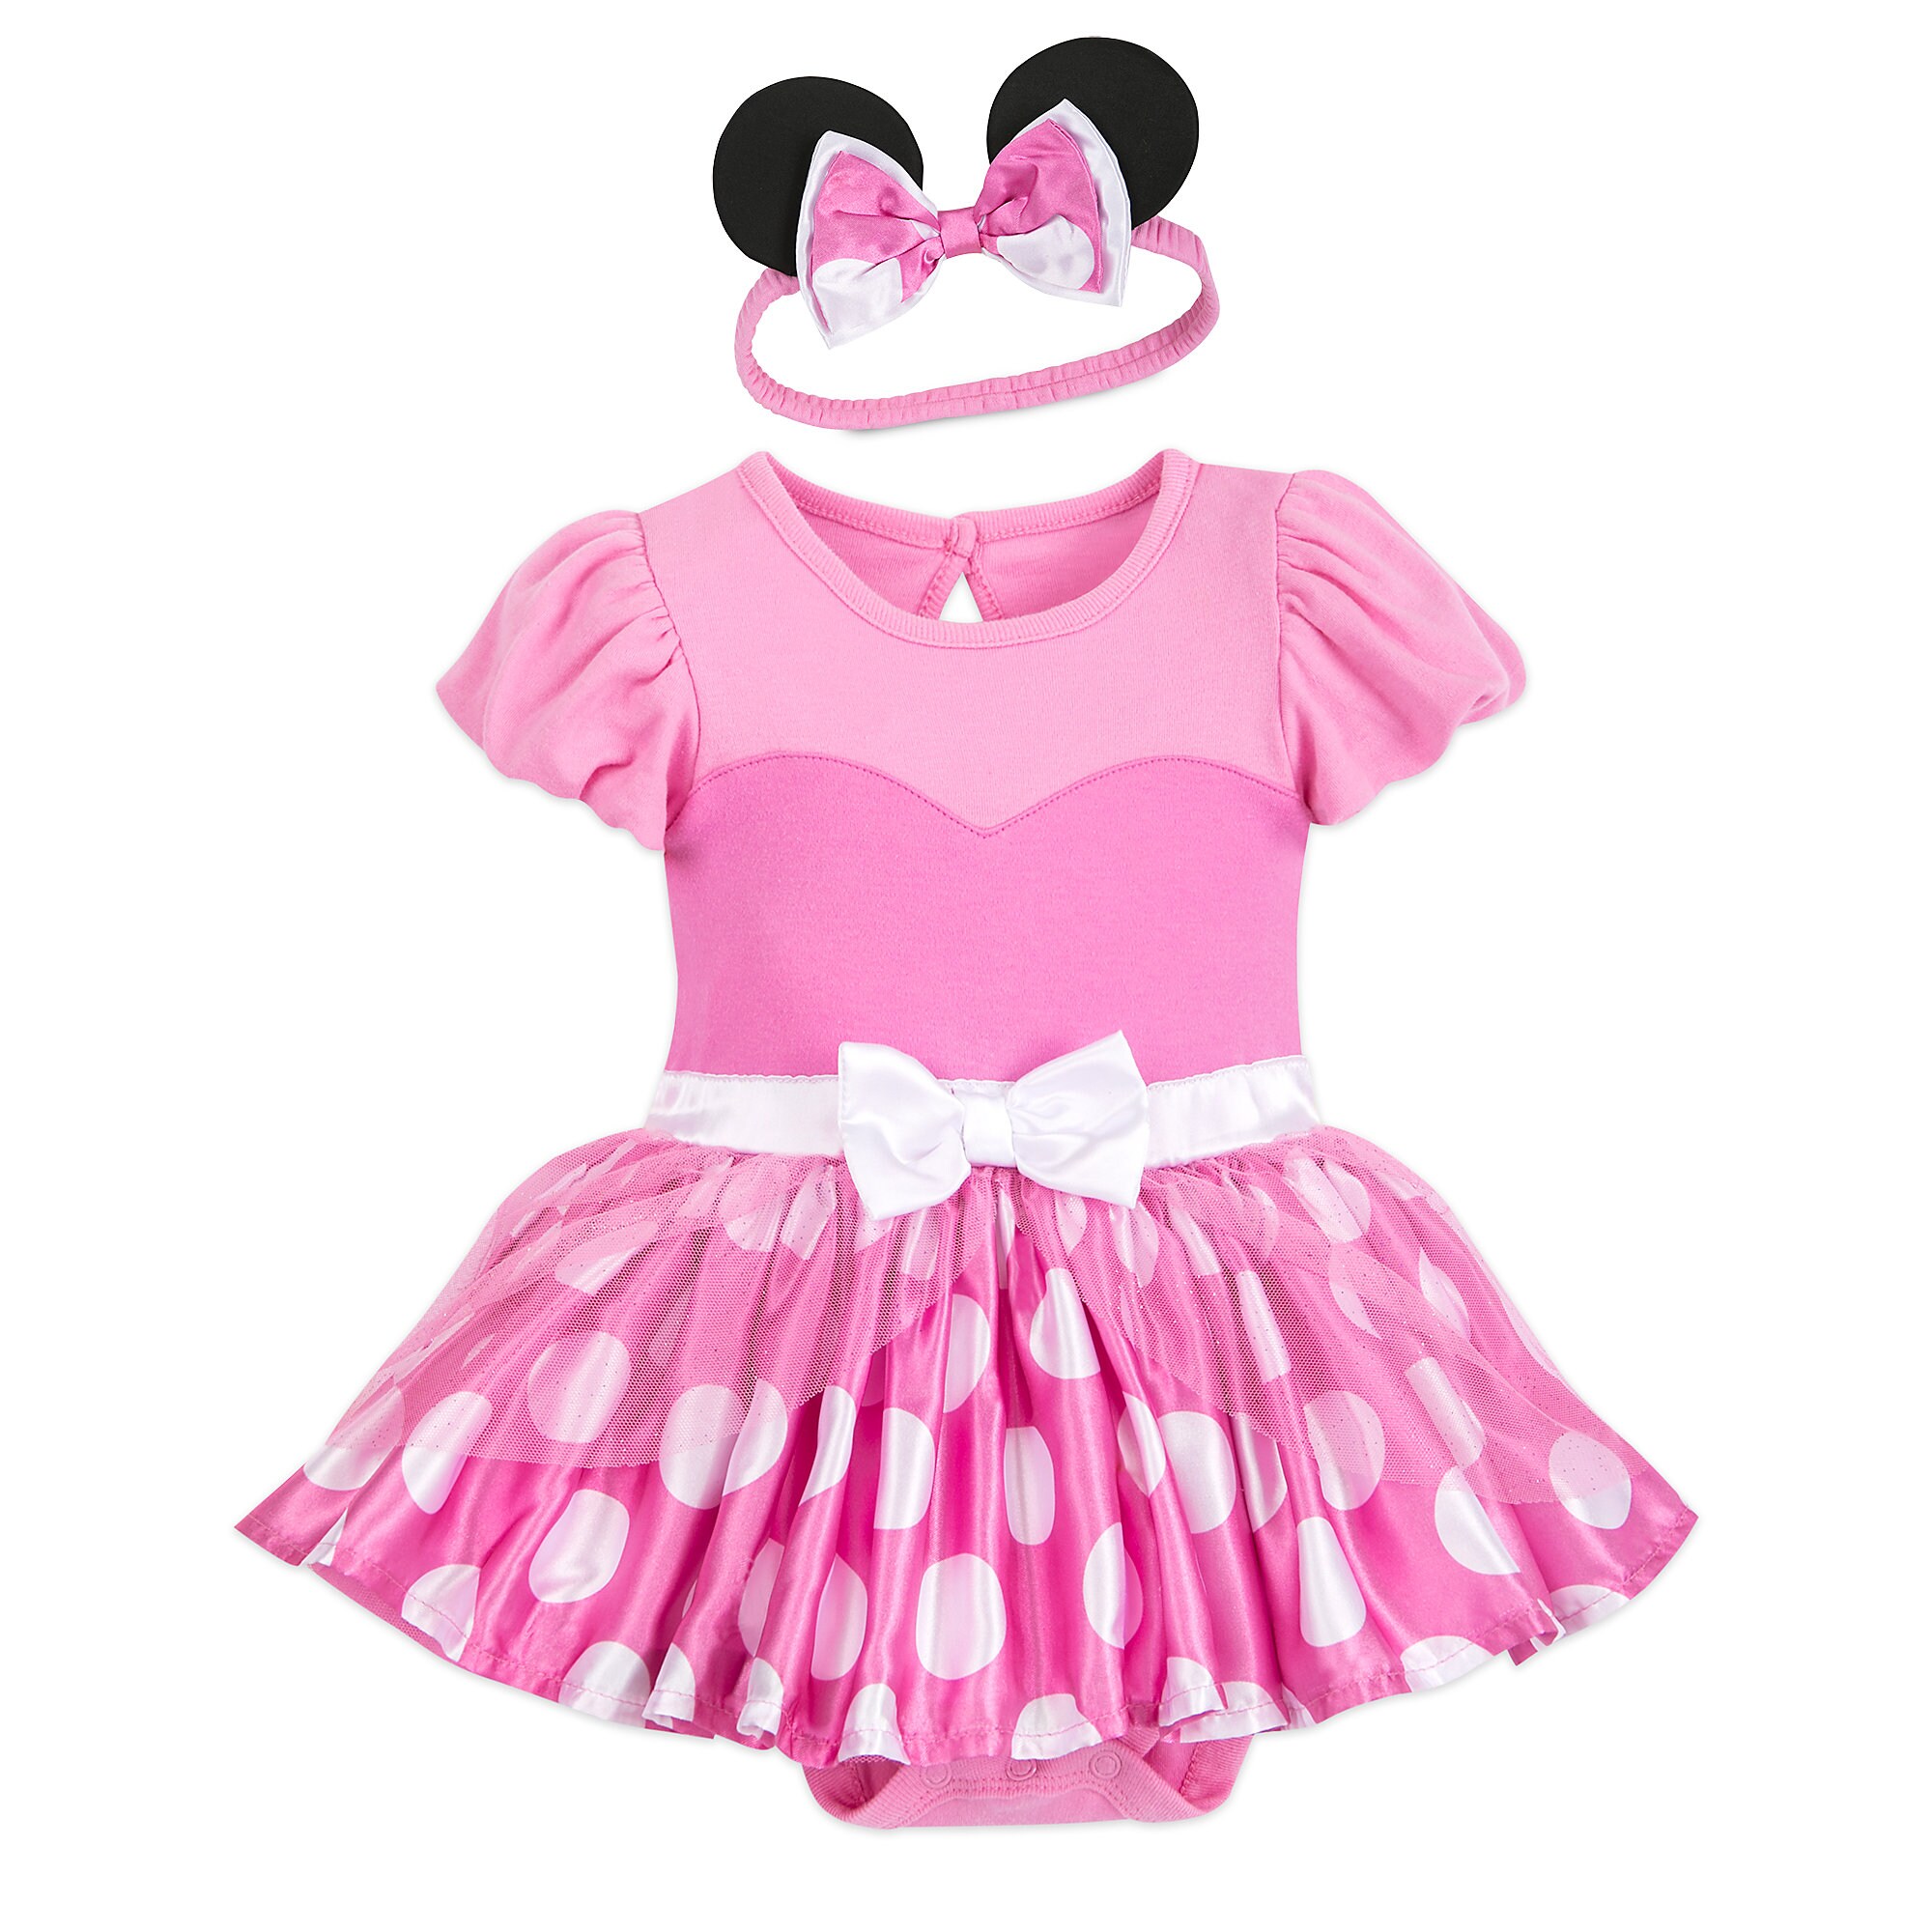 Minnie Mouse Costume Bodysuit for Baby - Pink